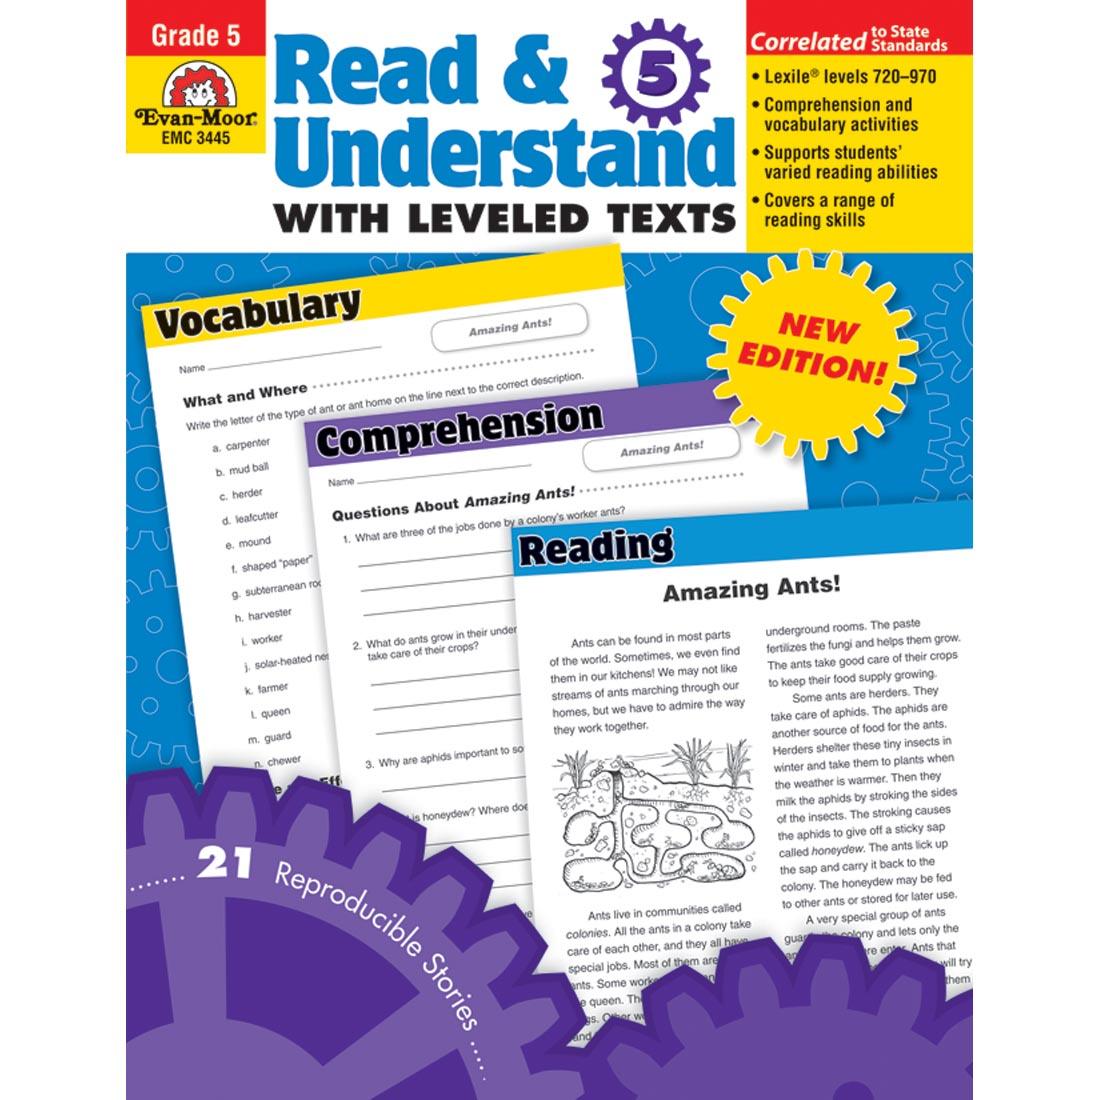 Grade 5 Read and Understand with Leveled Texts by Evan-Moor